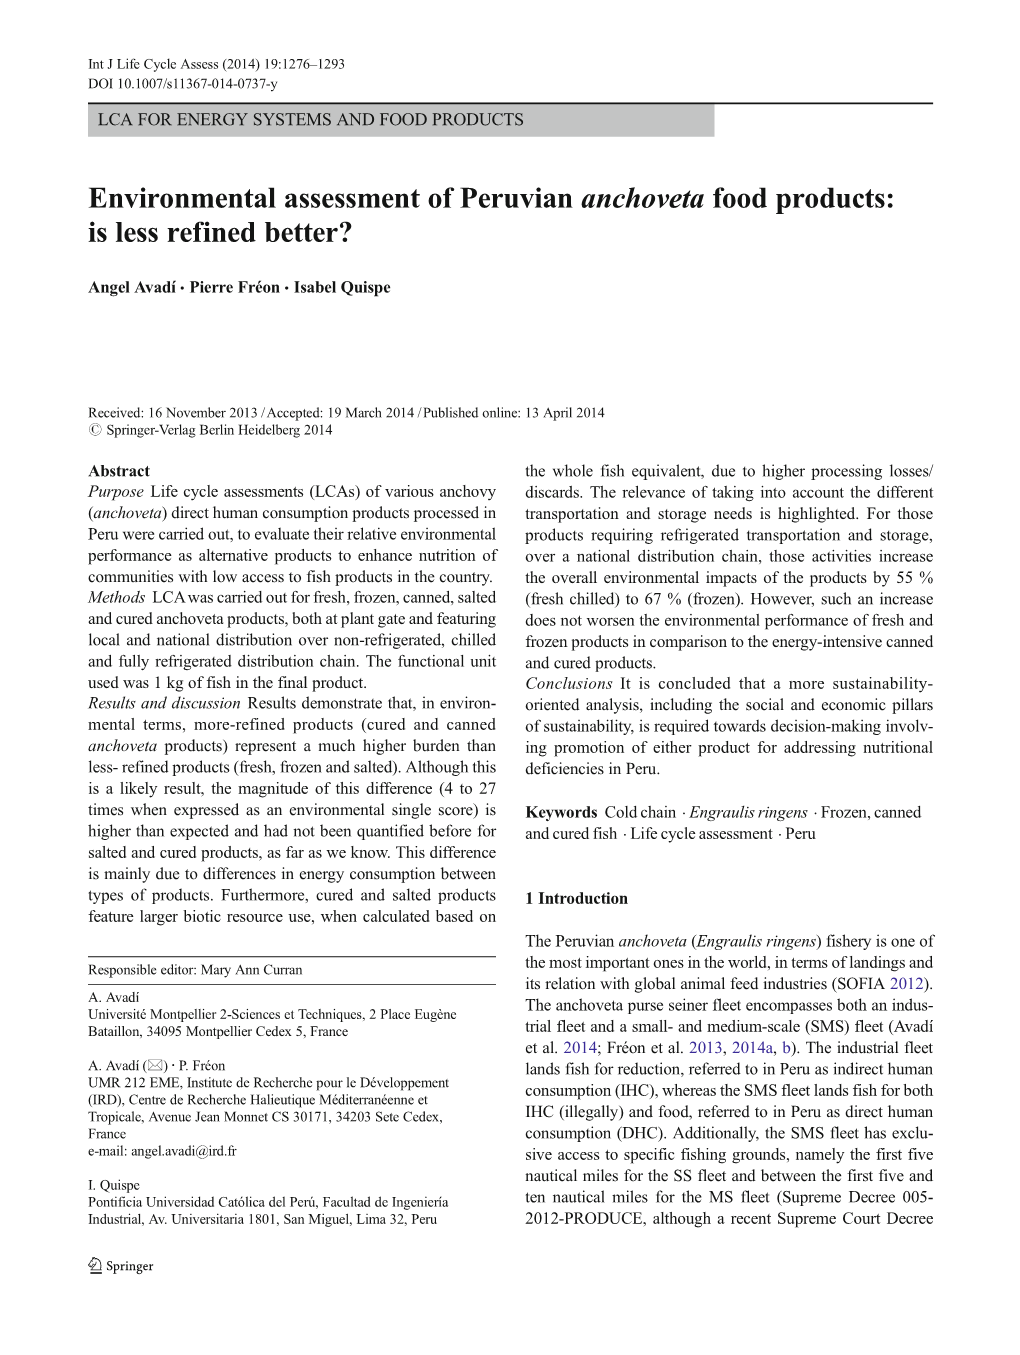 Environmental Assessment of Peruvian Anchoveta Food Products: Is Less Refined Better?